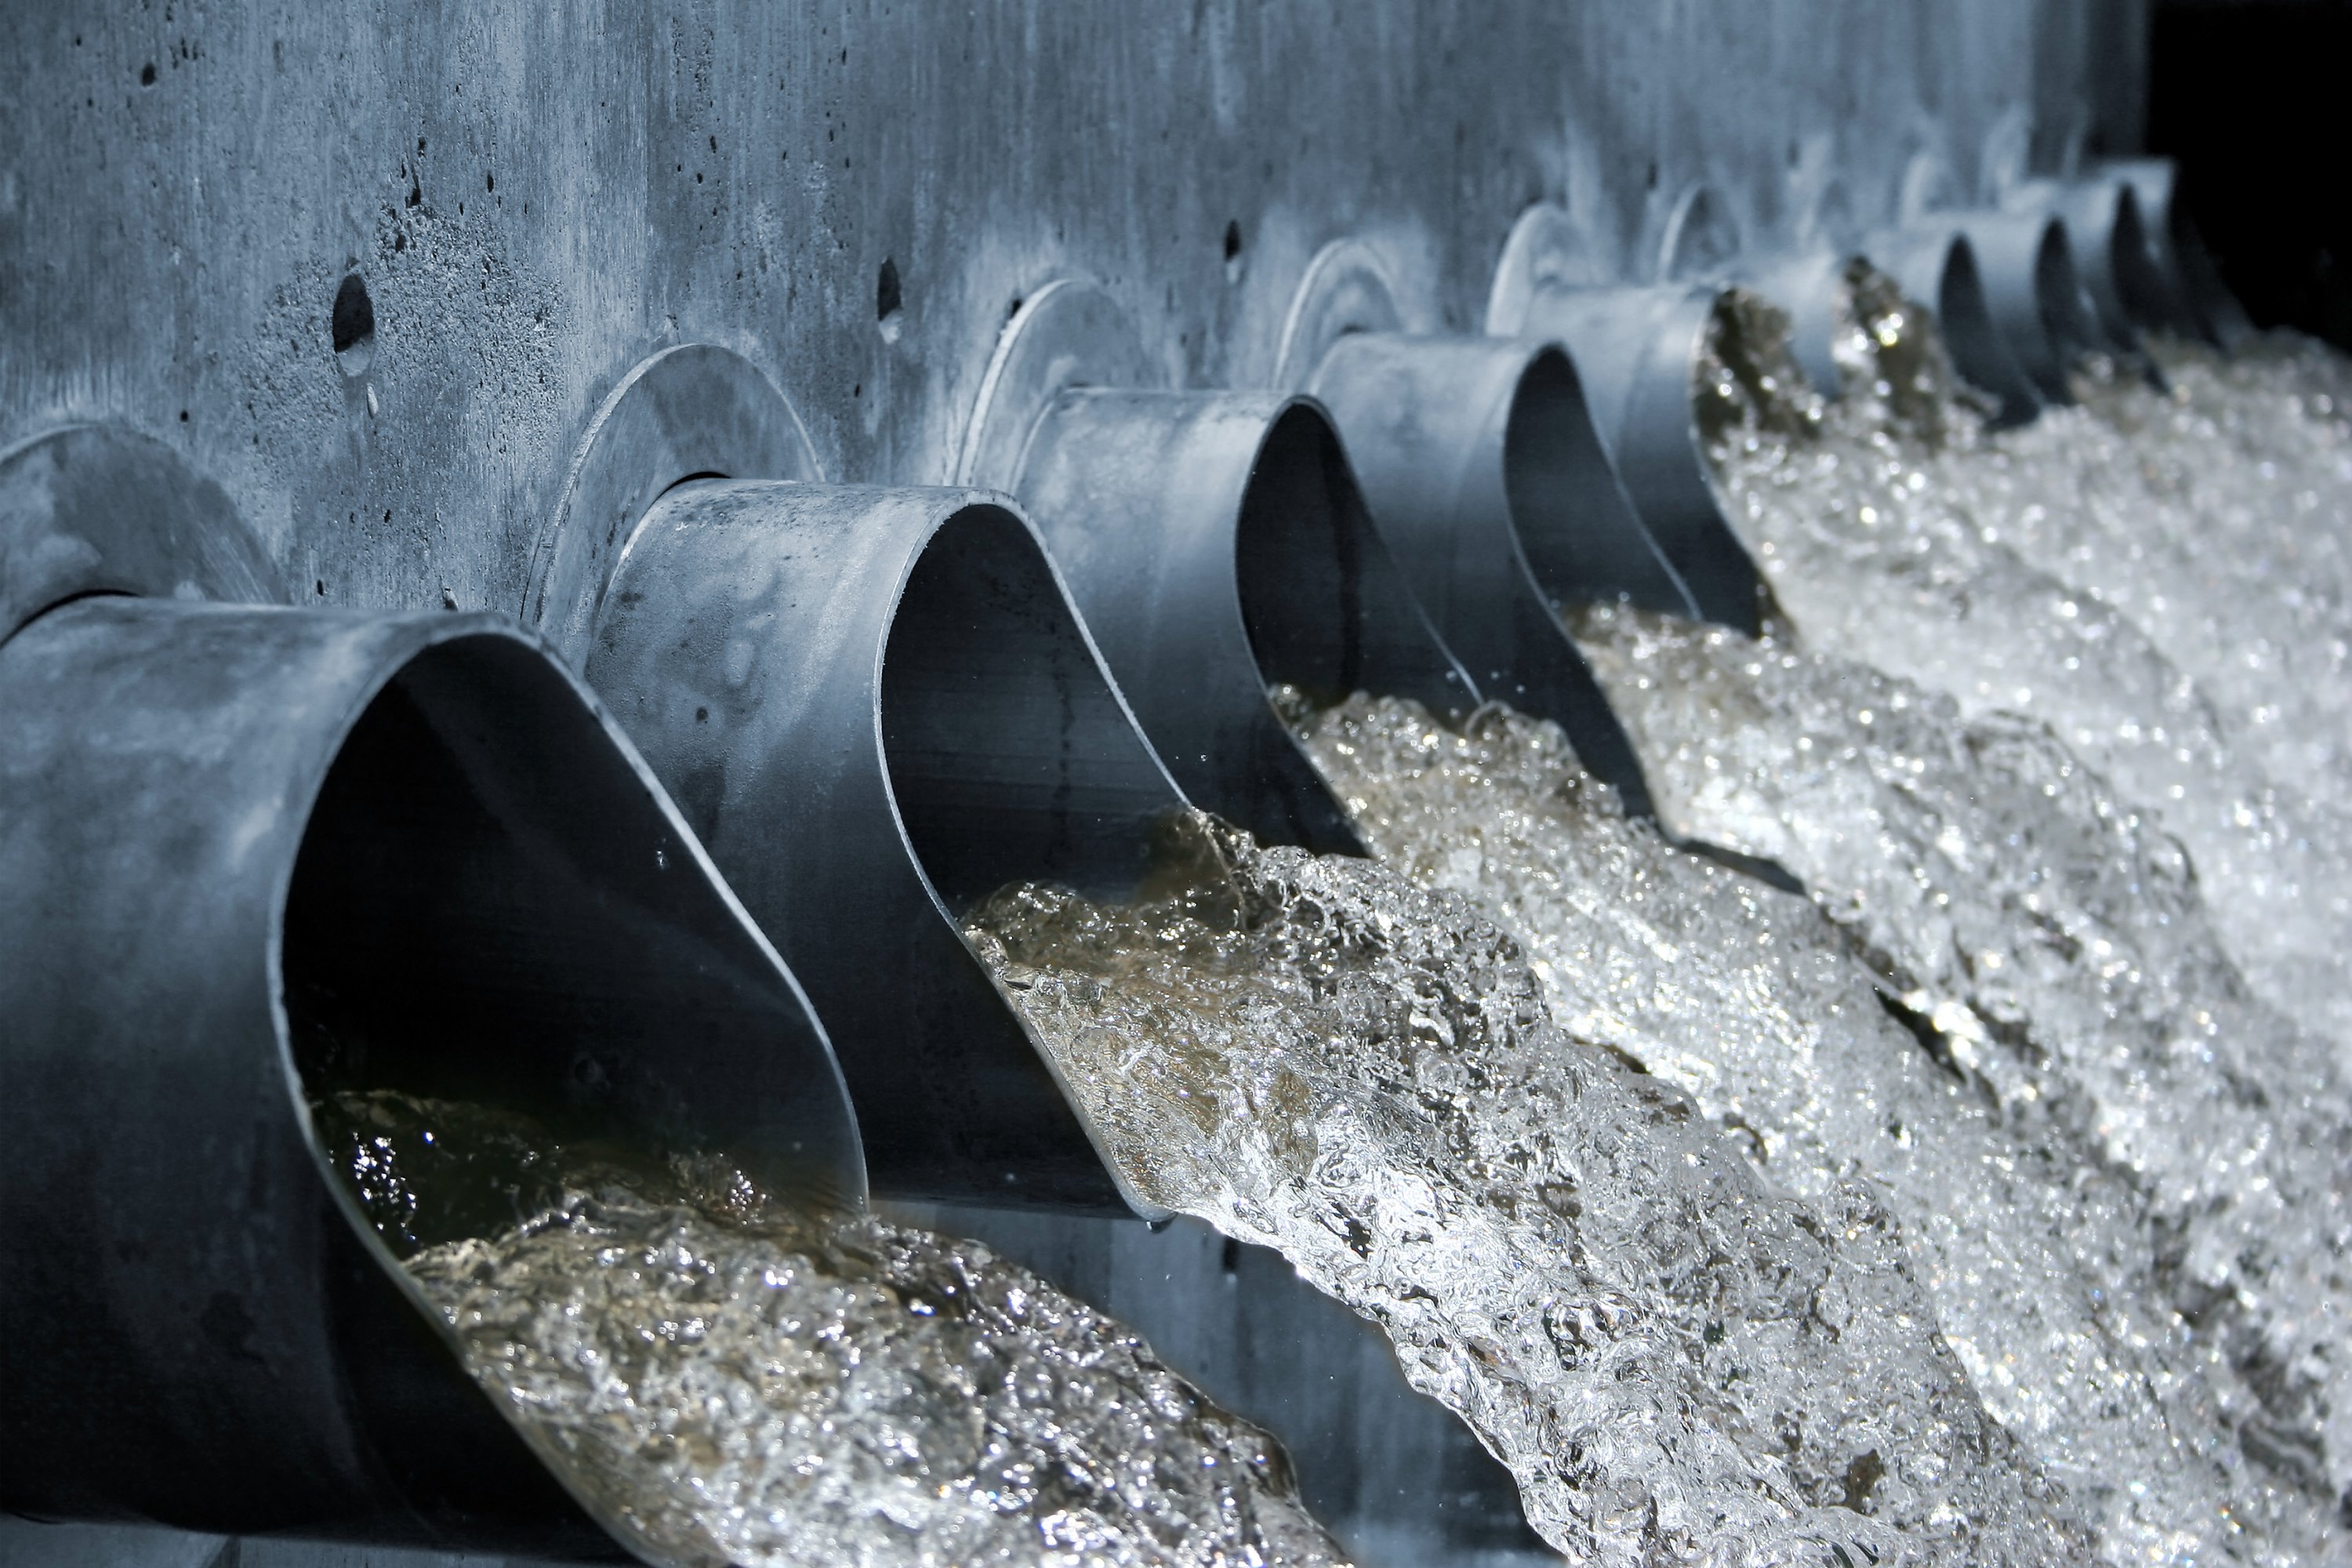 Wastewater surveillance has been used to monitor health threats and viral diseases before. (iStock Photo)